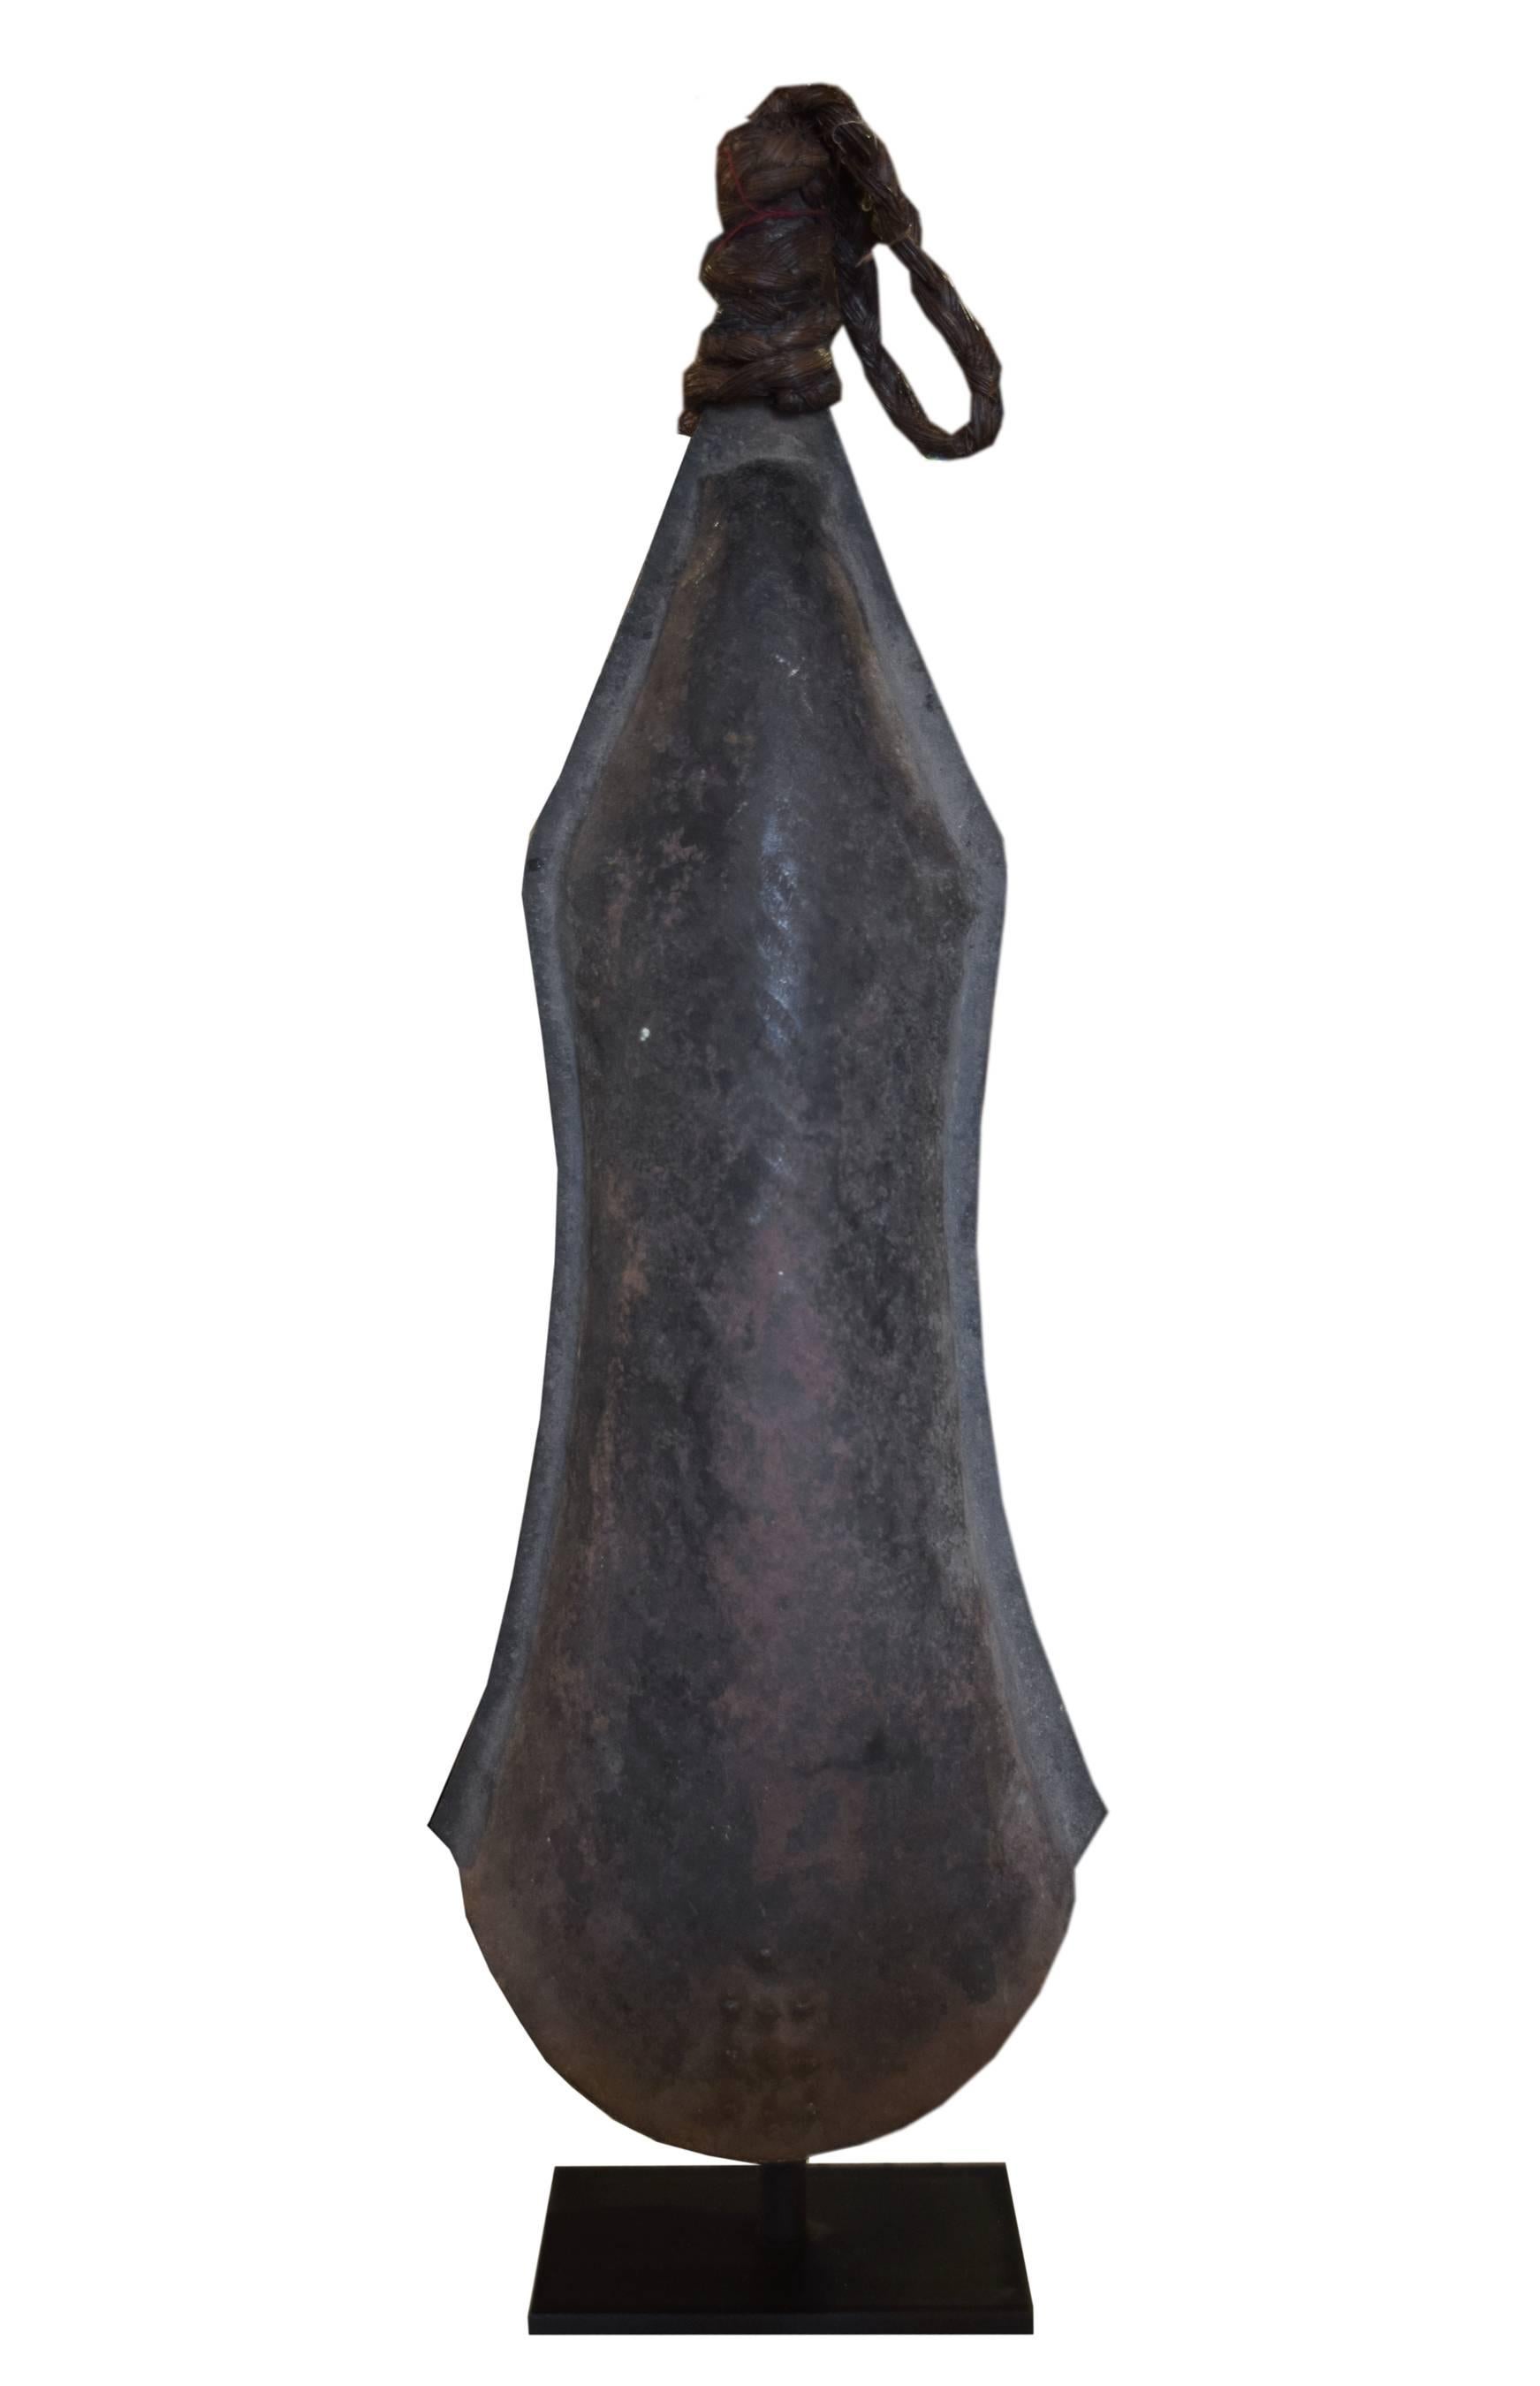 Congolese African Hammered Iron Gong with Original Rope on Custom Mount